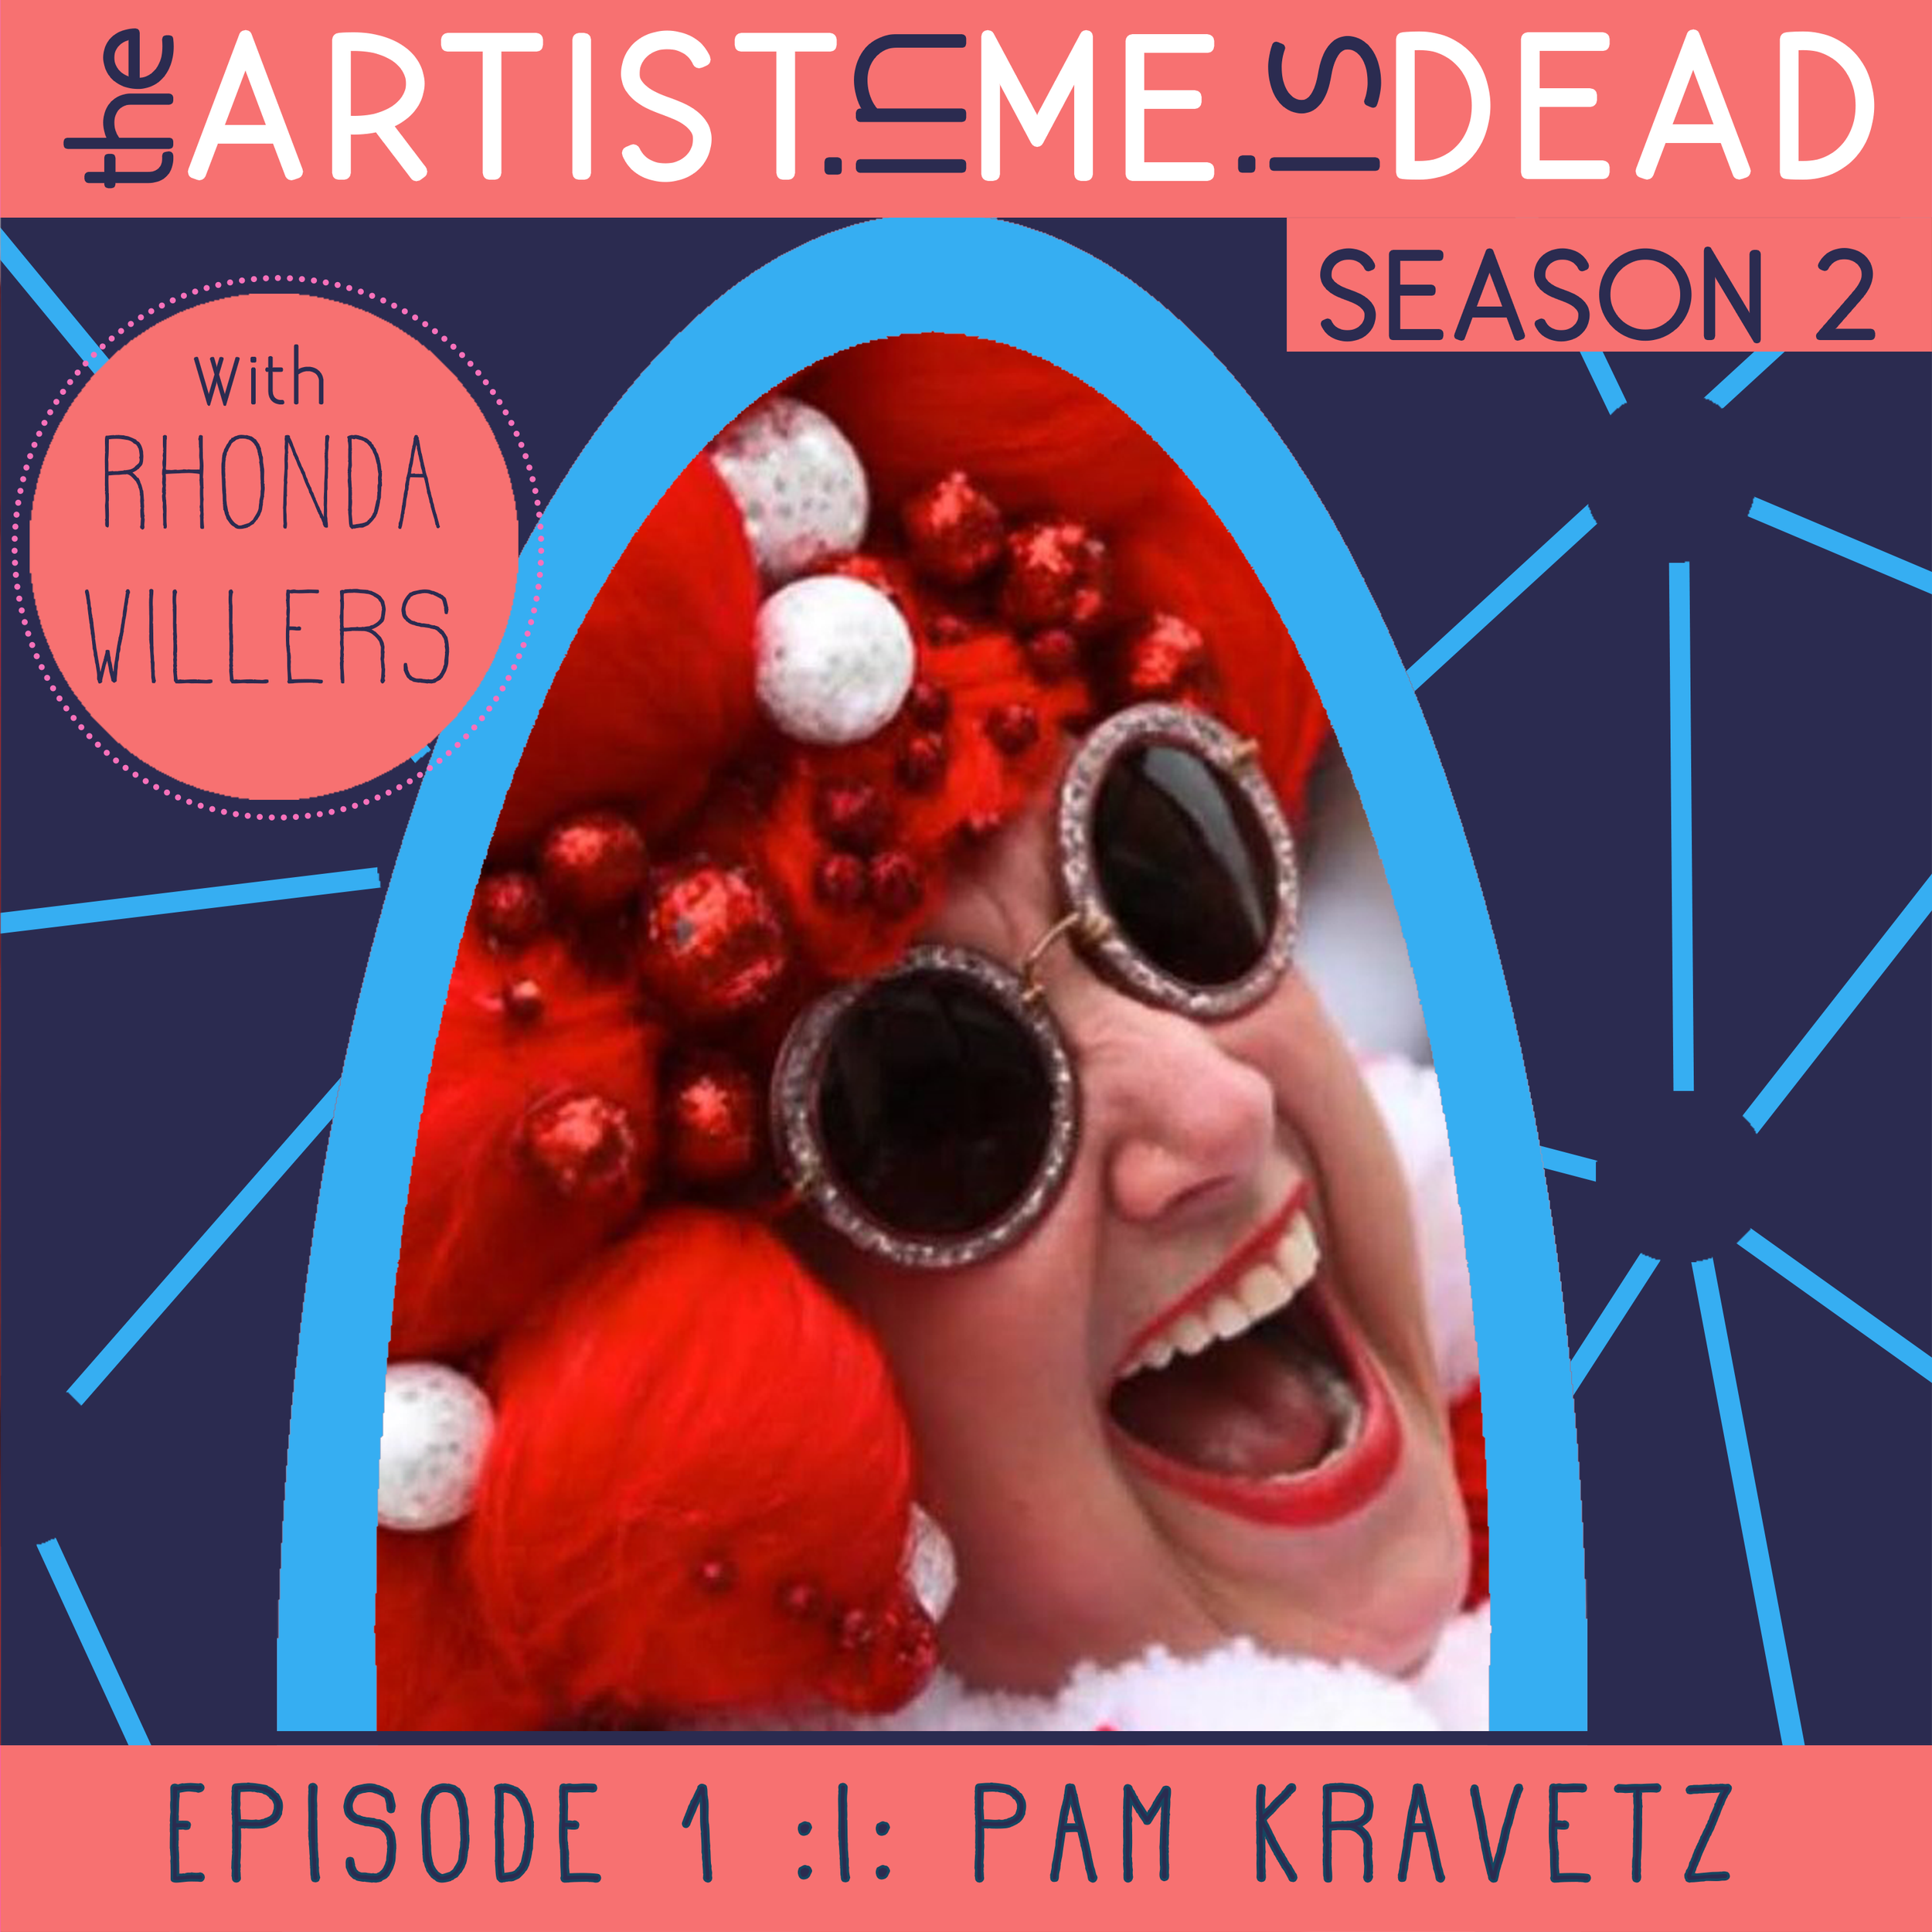 S2E1_Pam-Kravetz_The-Artist-In-Me-Is-Dead-Podcast_IG_square.png